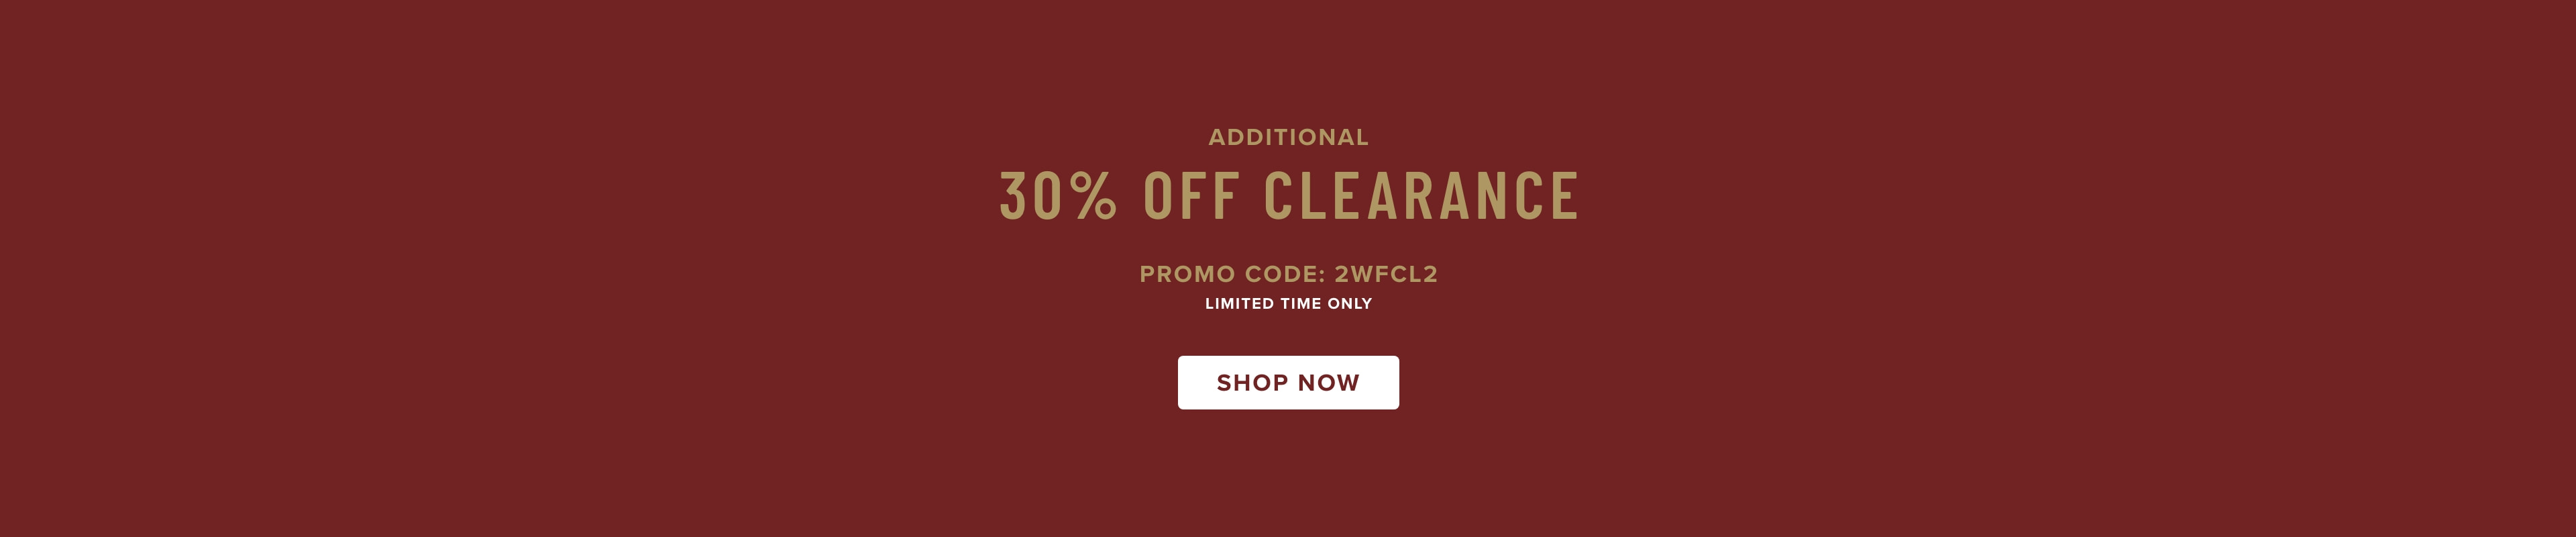 Click to shop an additional 30% off clearance.